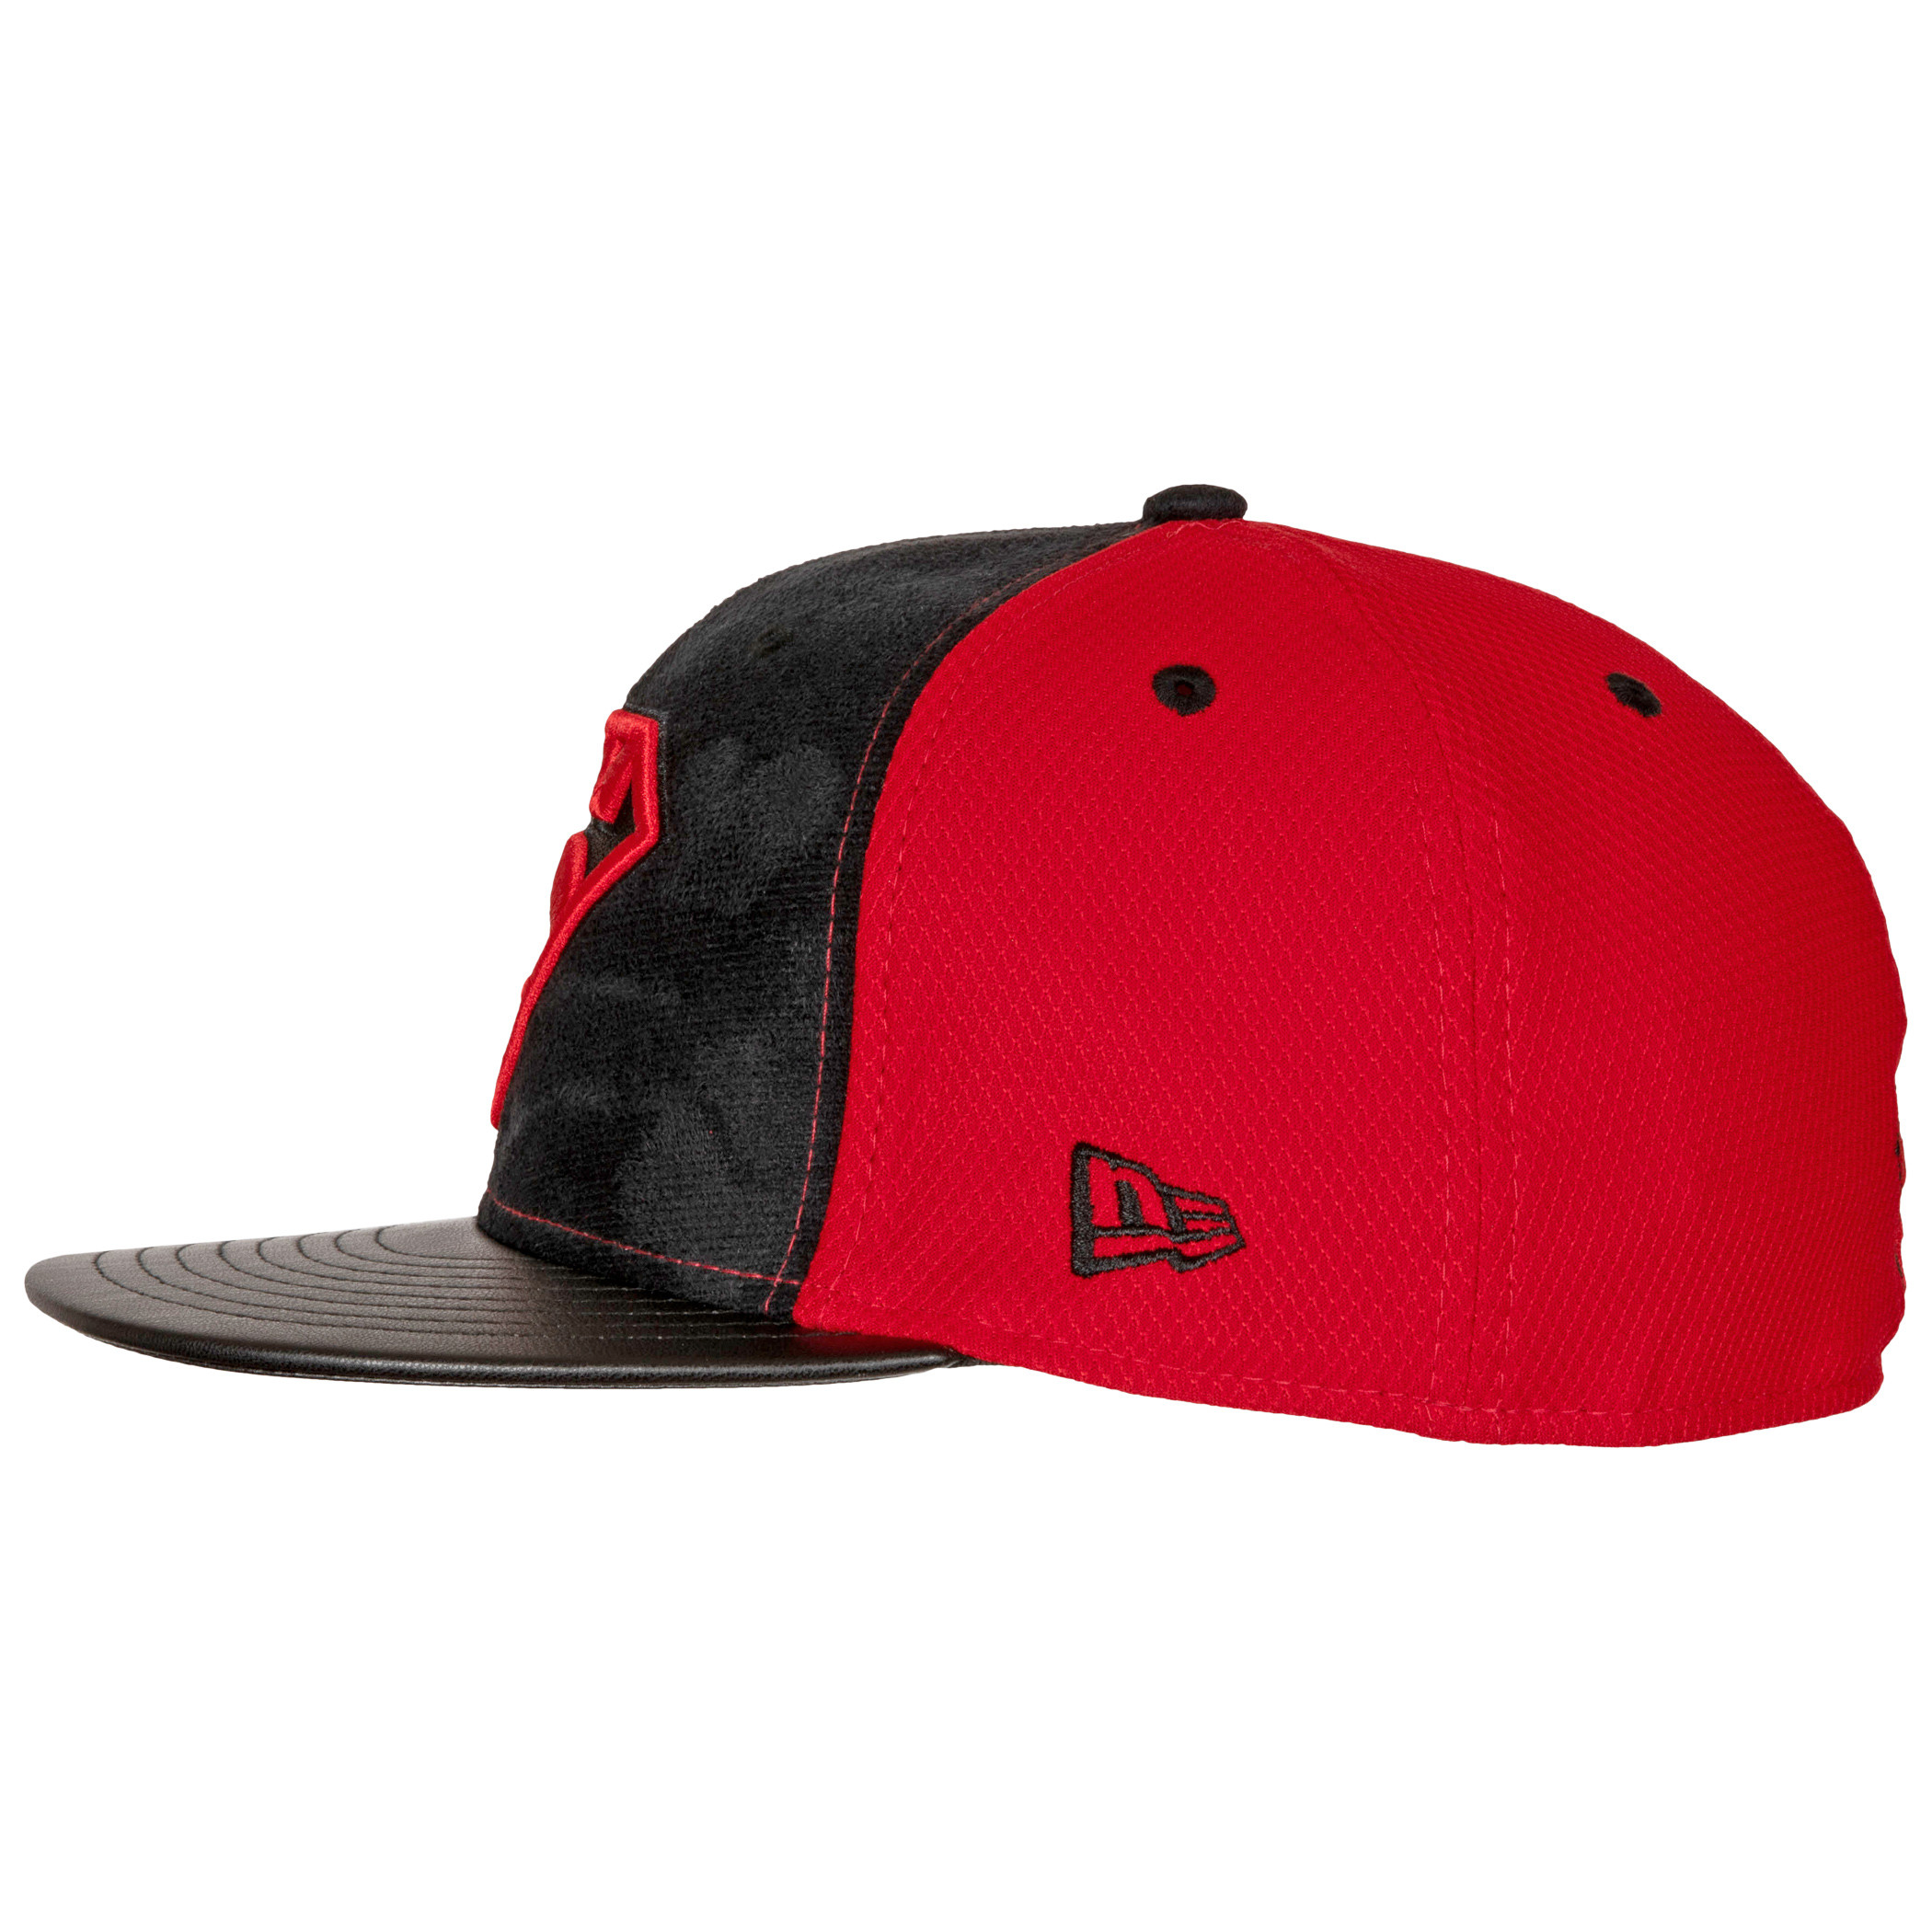 Superman Superboy Black & Red New Era 59Fifty Fitted Hat